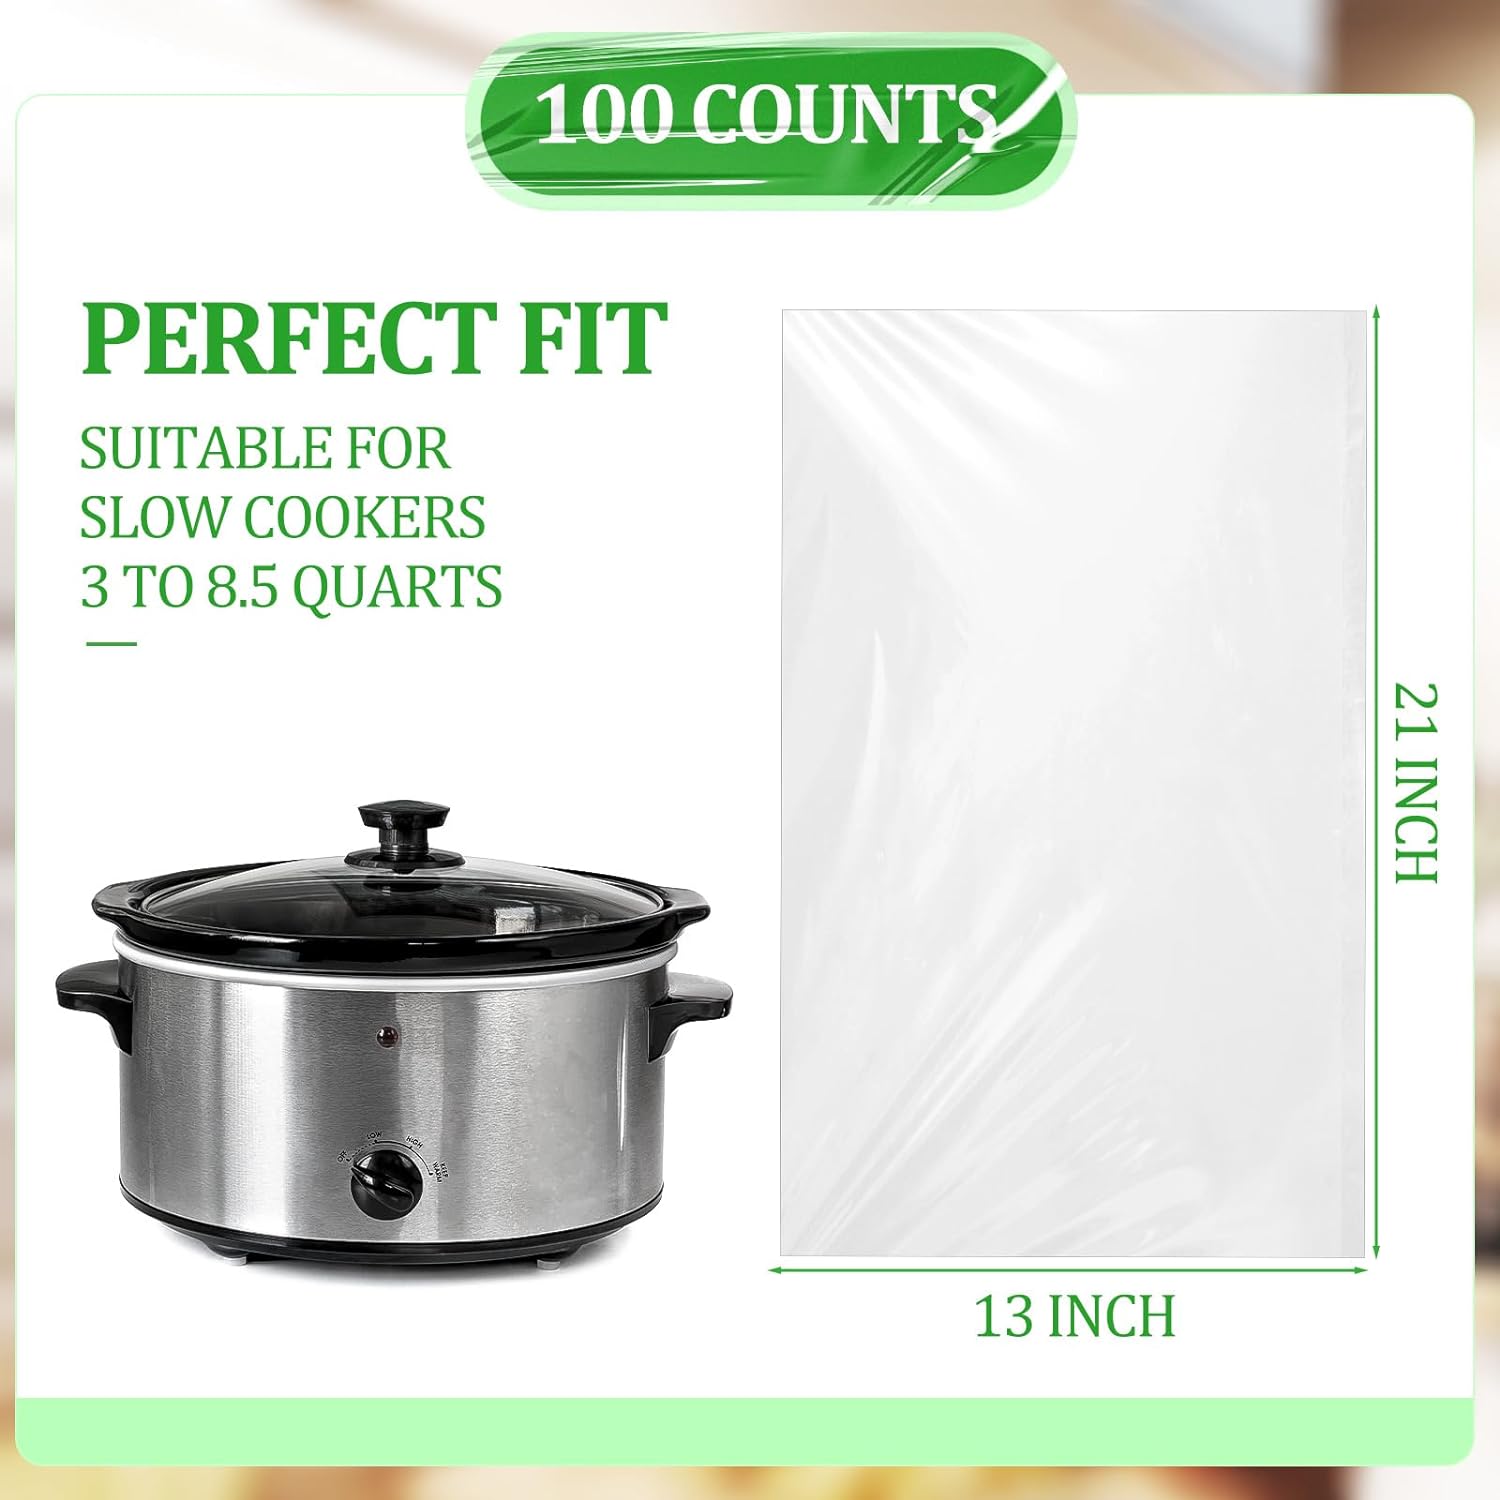 100 Count Plastic Slow Cooker Liners 21 x 13 Inches Kitchens Cooking Bags Large Convenient Disposable Slow Cooker Bags Suitable for Slow Cookers 3 to 8.5 Quarts Pot